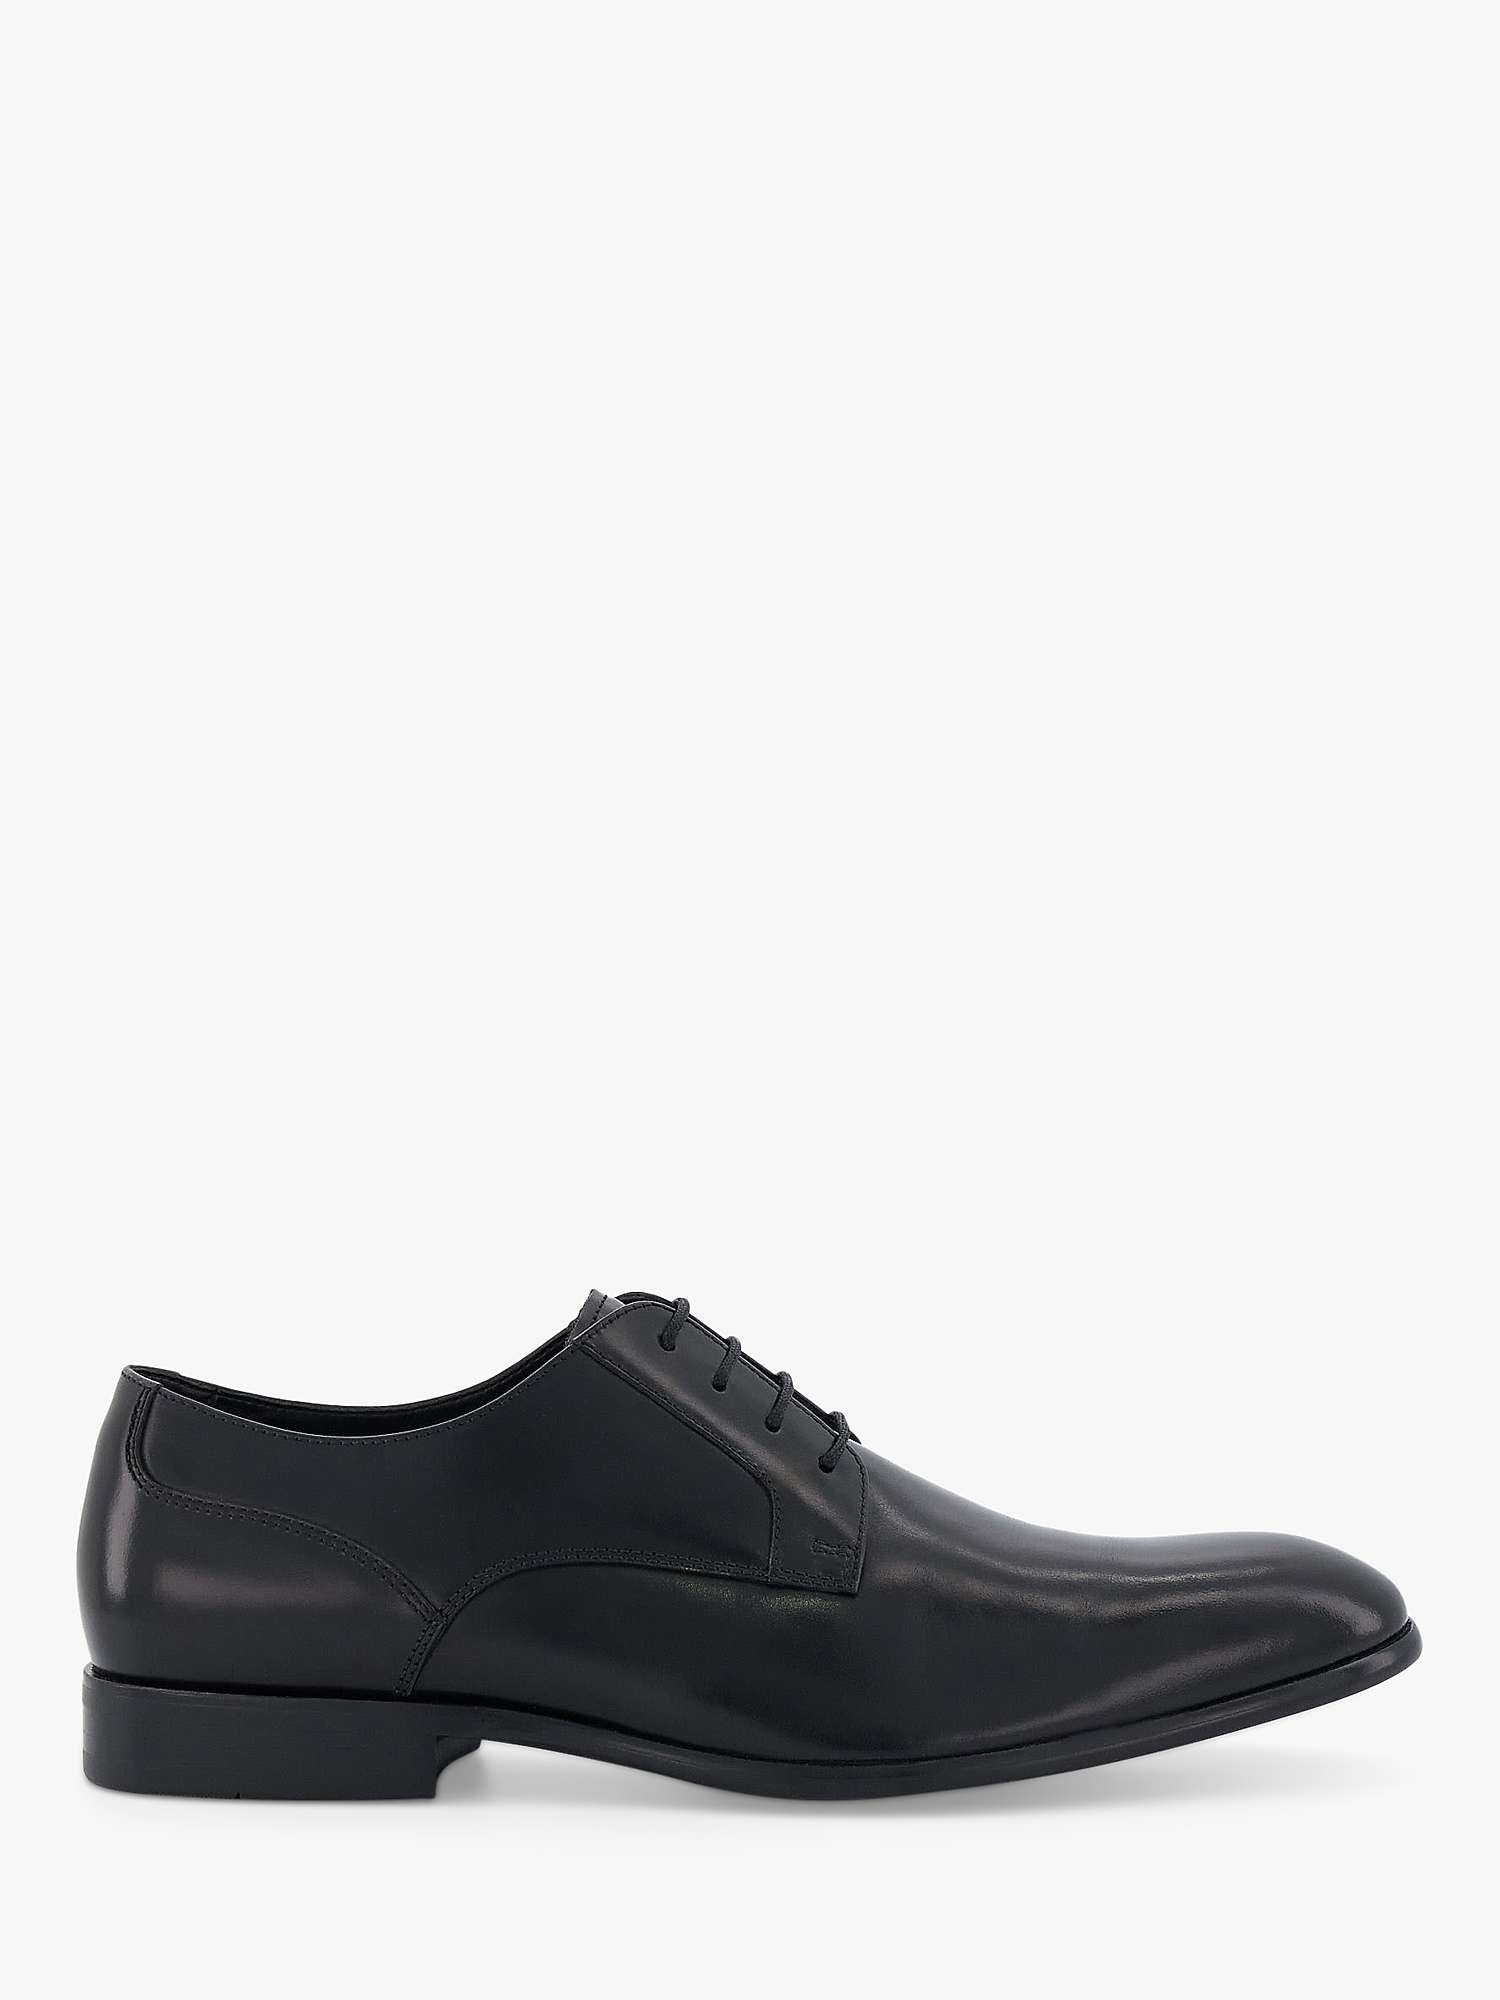 Buy Dune Southwark Leather Lace Up Shoes Online at johnlewis.com